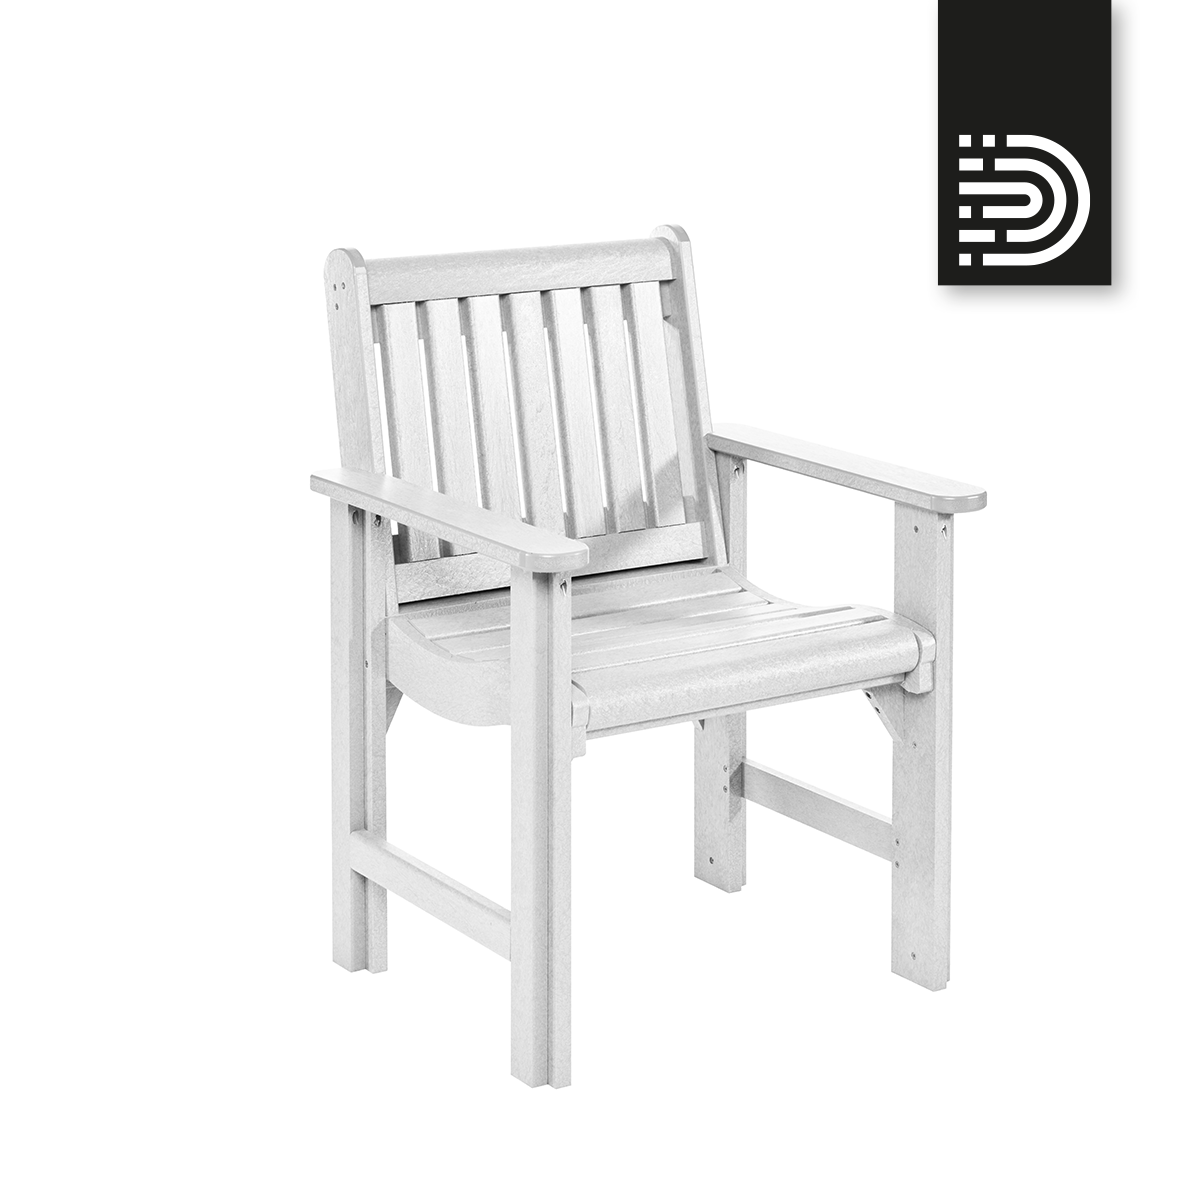 C12 Dining Chair - white 02